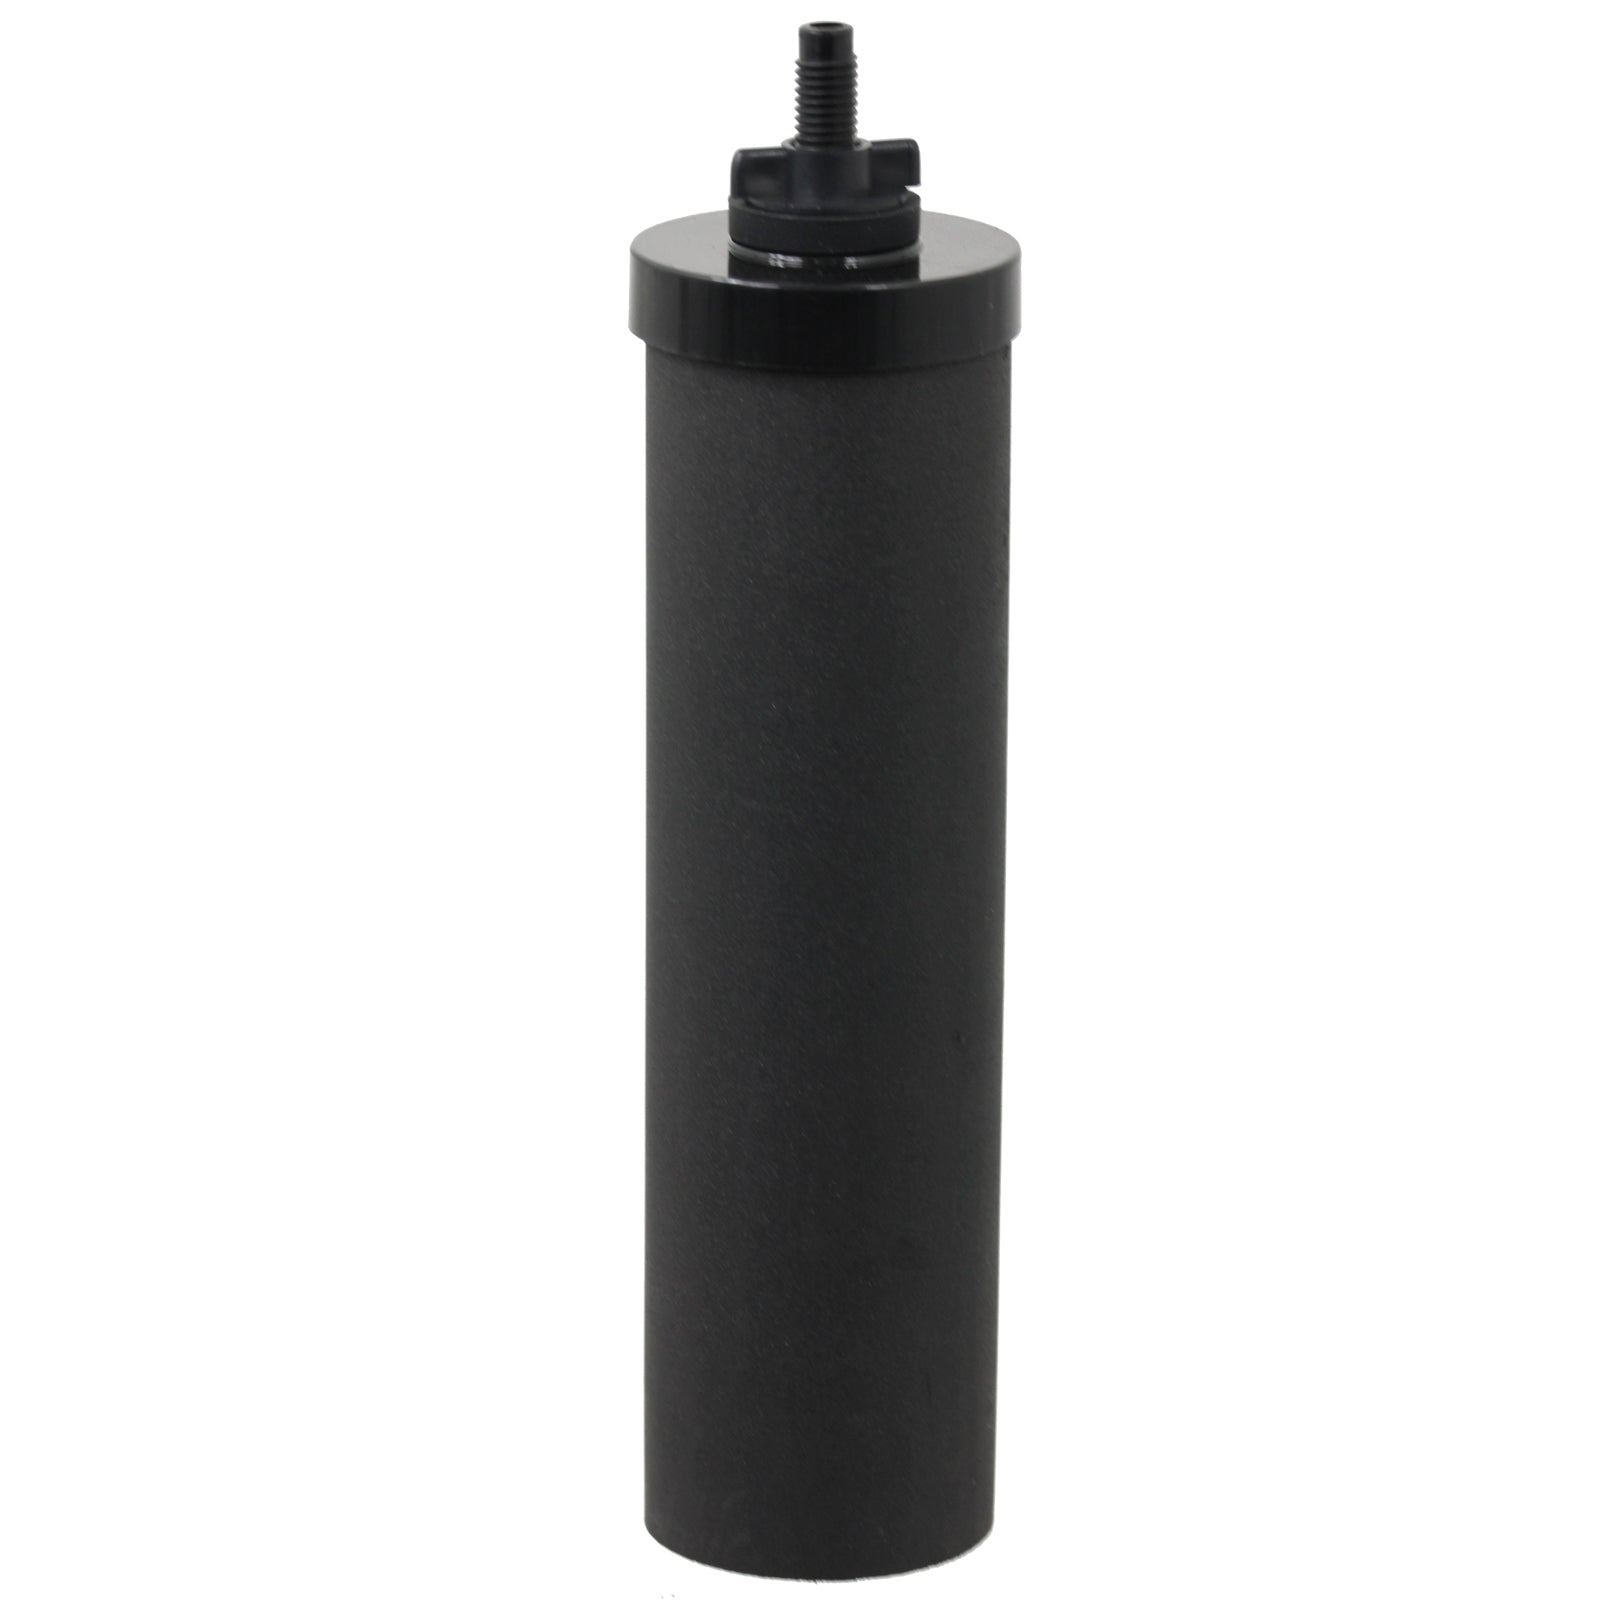 Water Filter Element for Berkey Purification System Cartridge Filters Black x 2